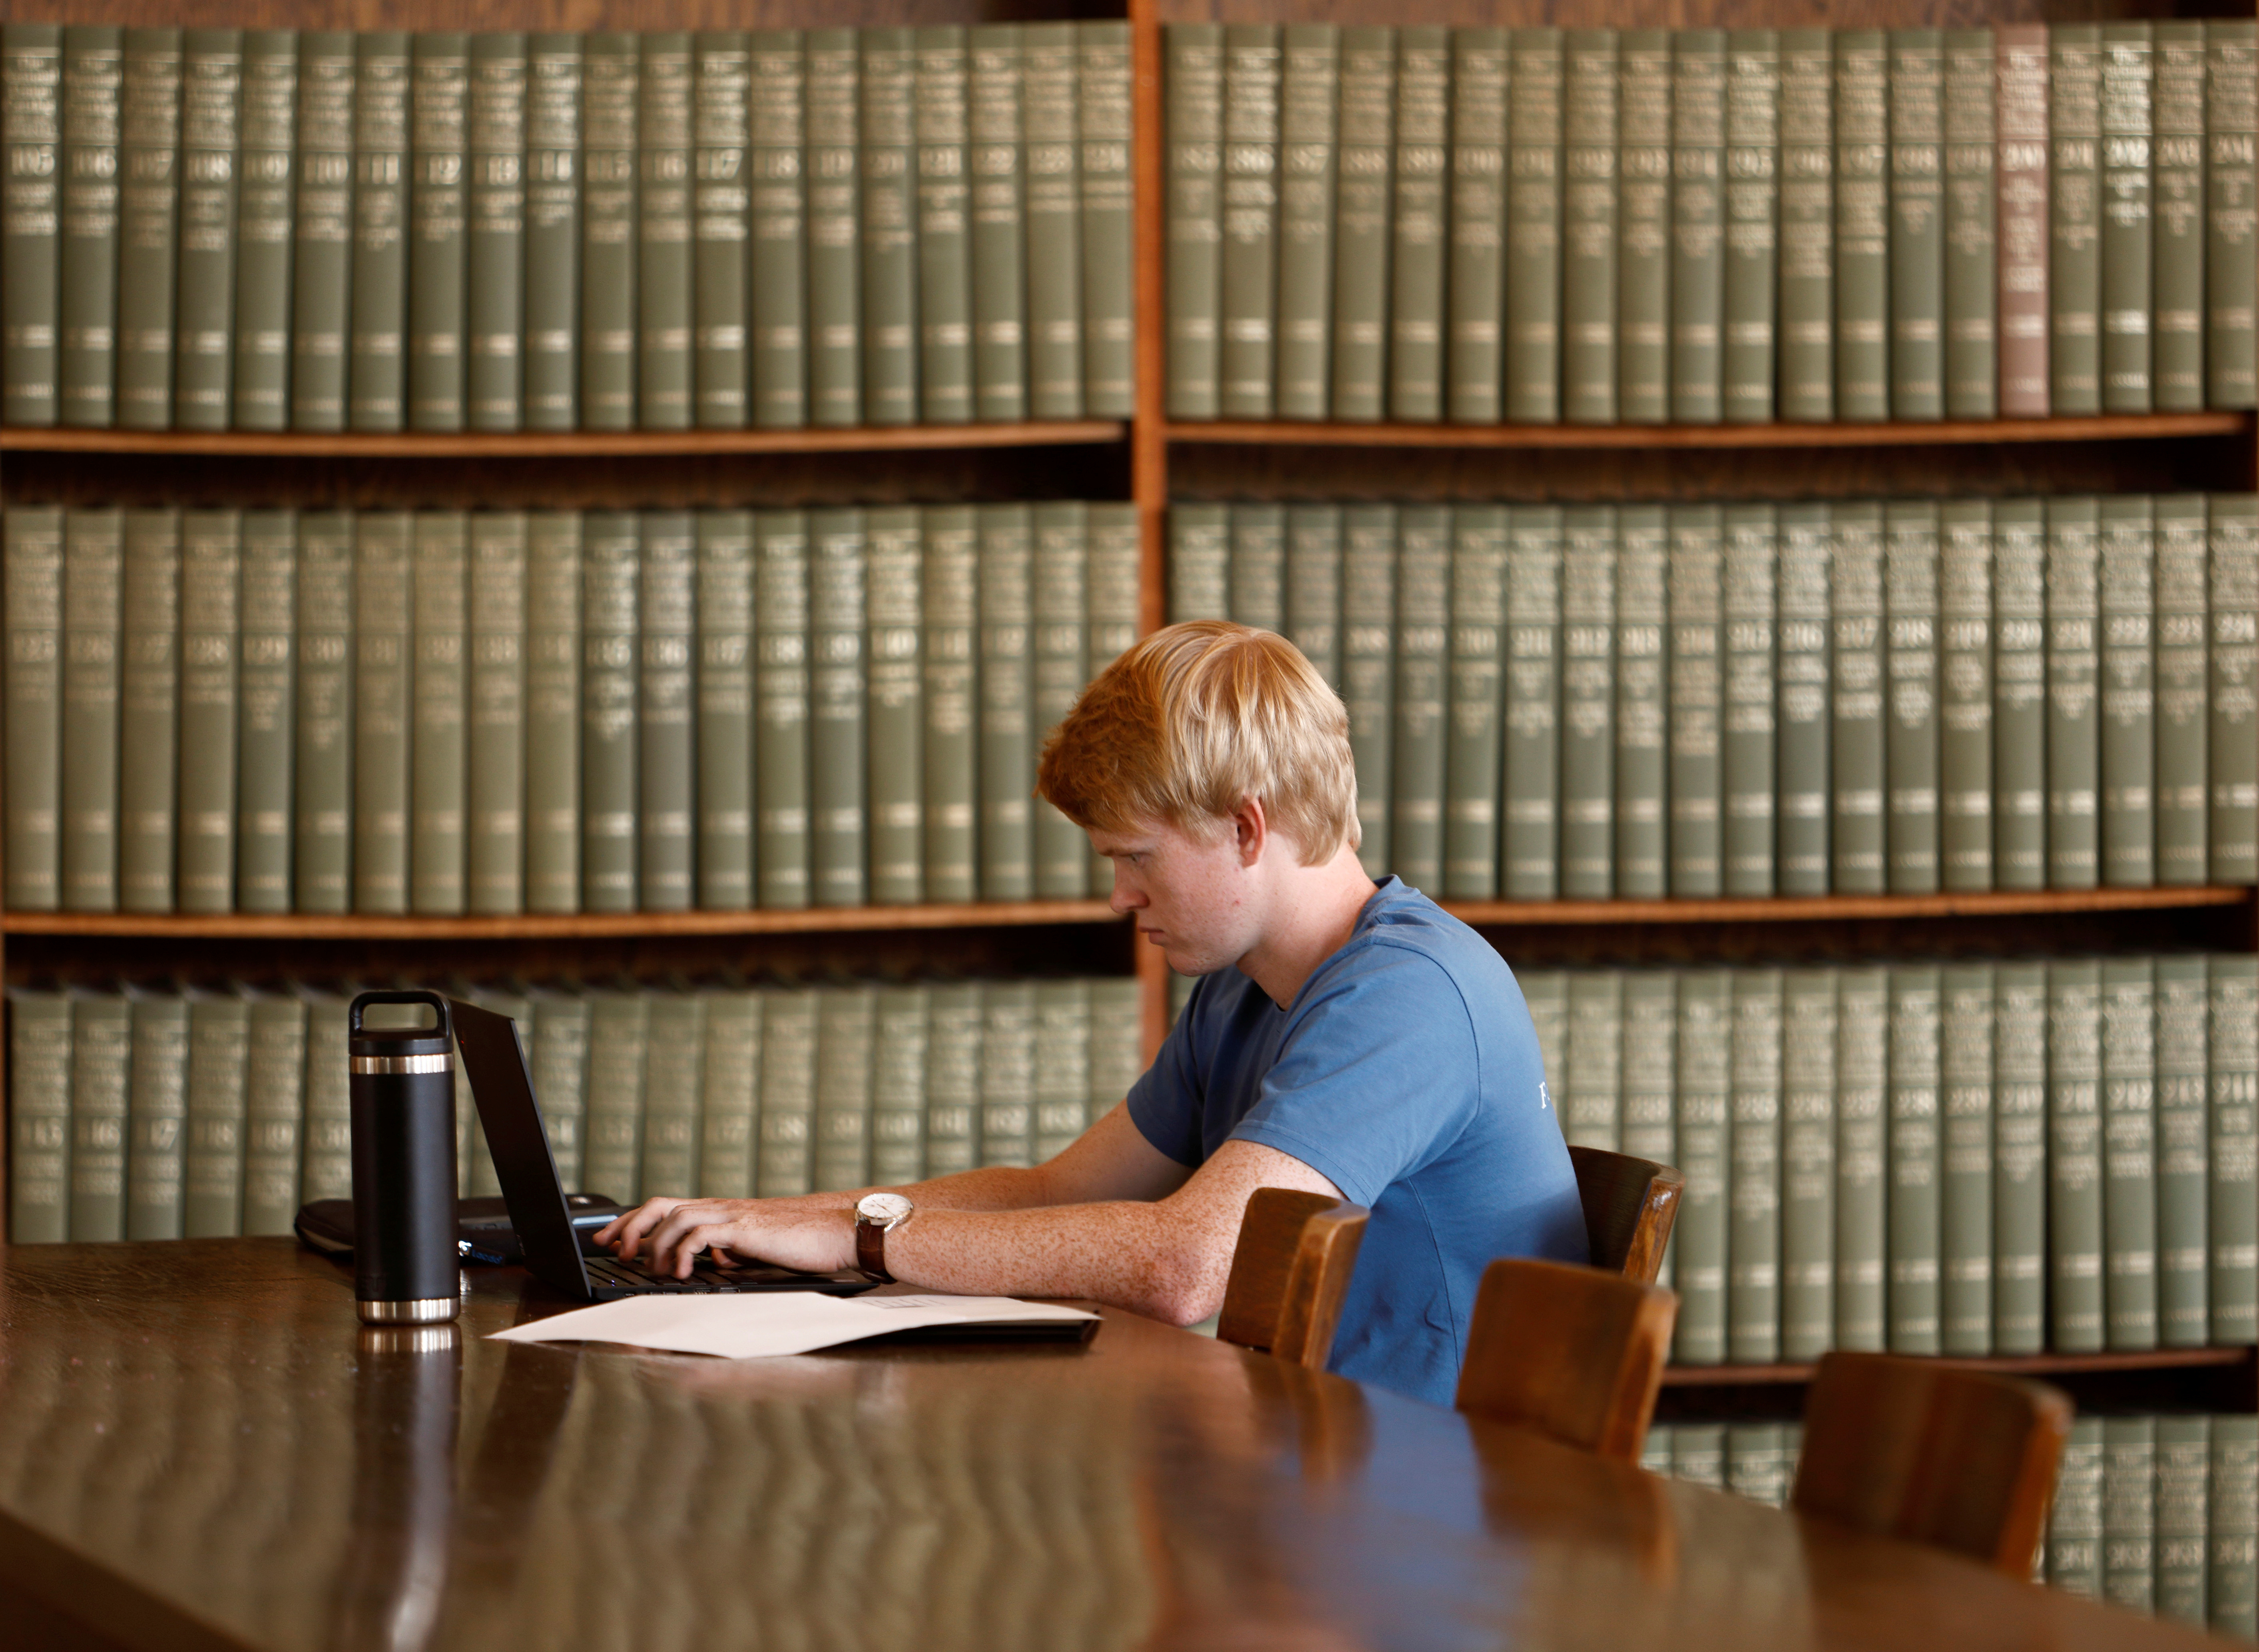 A student works in Wilson Library on the campus of the University of North Carolina at Chapel Hill, North Carolina